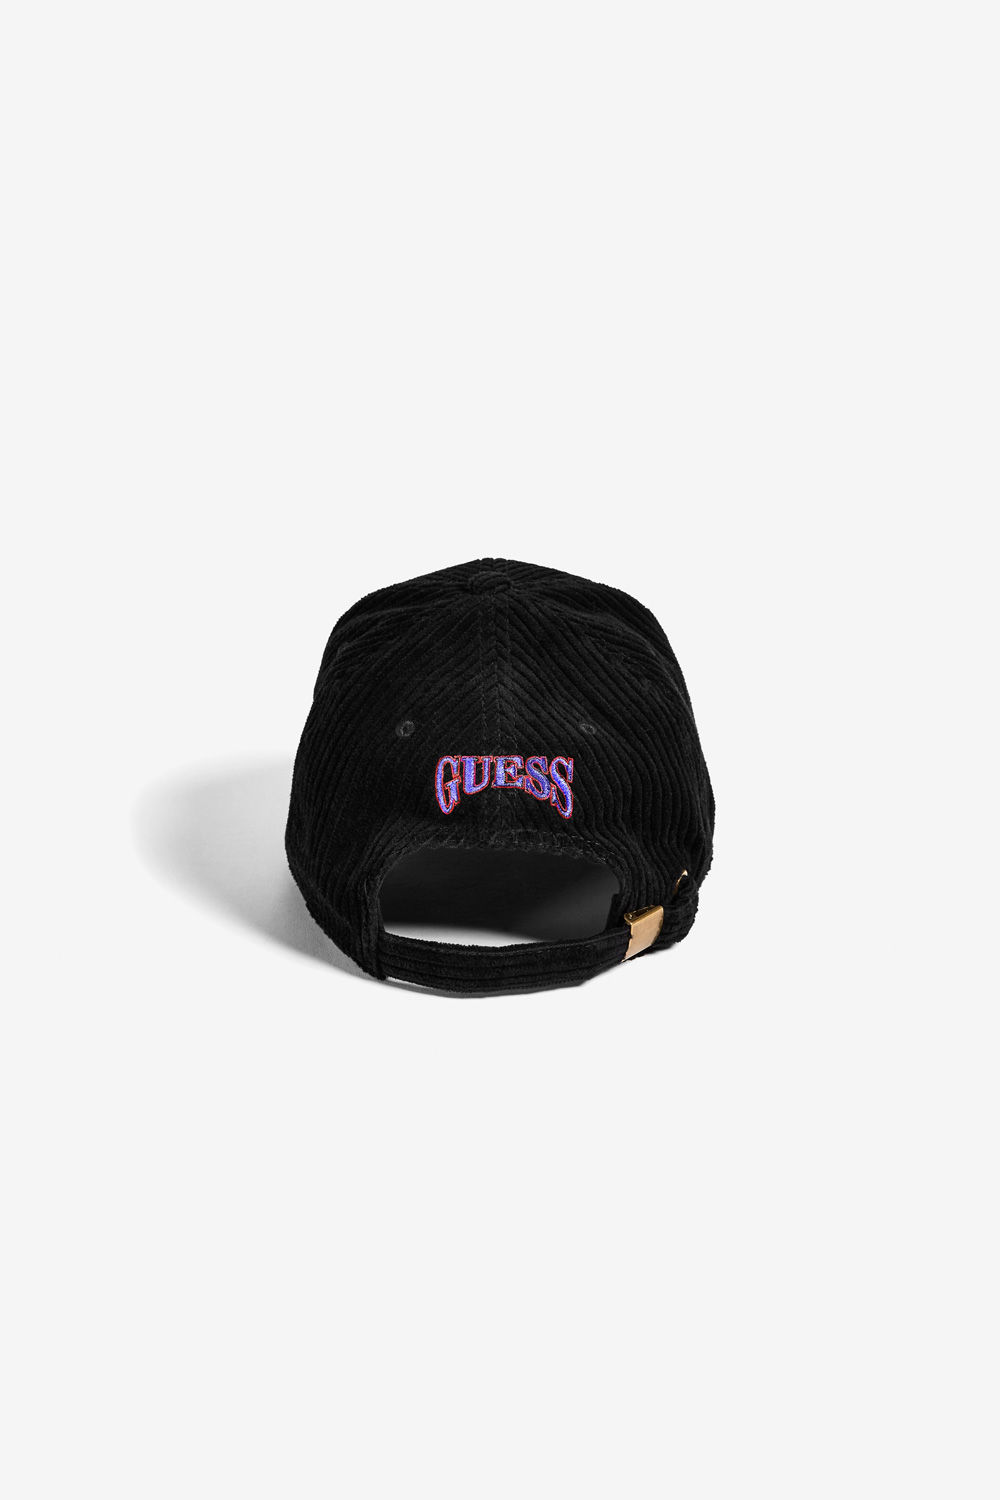 guess fall Guess Jeans U.S.A. Sheck Wes